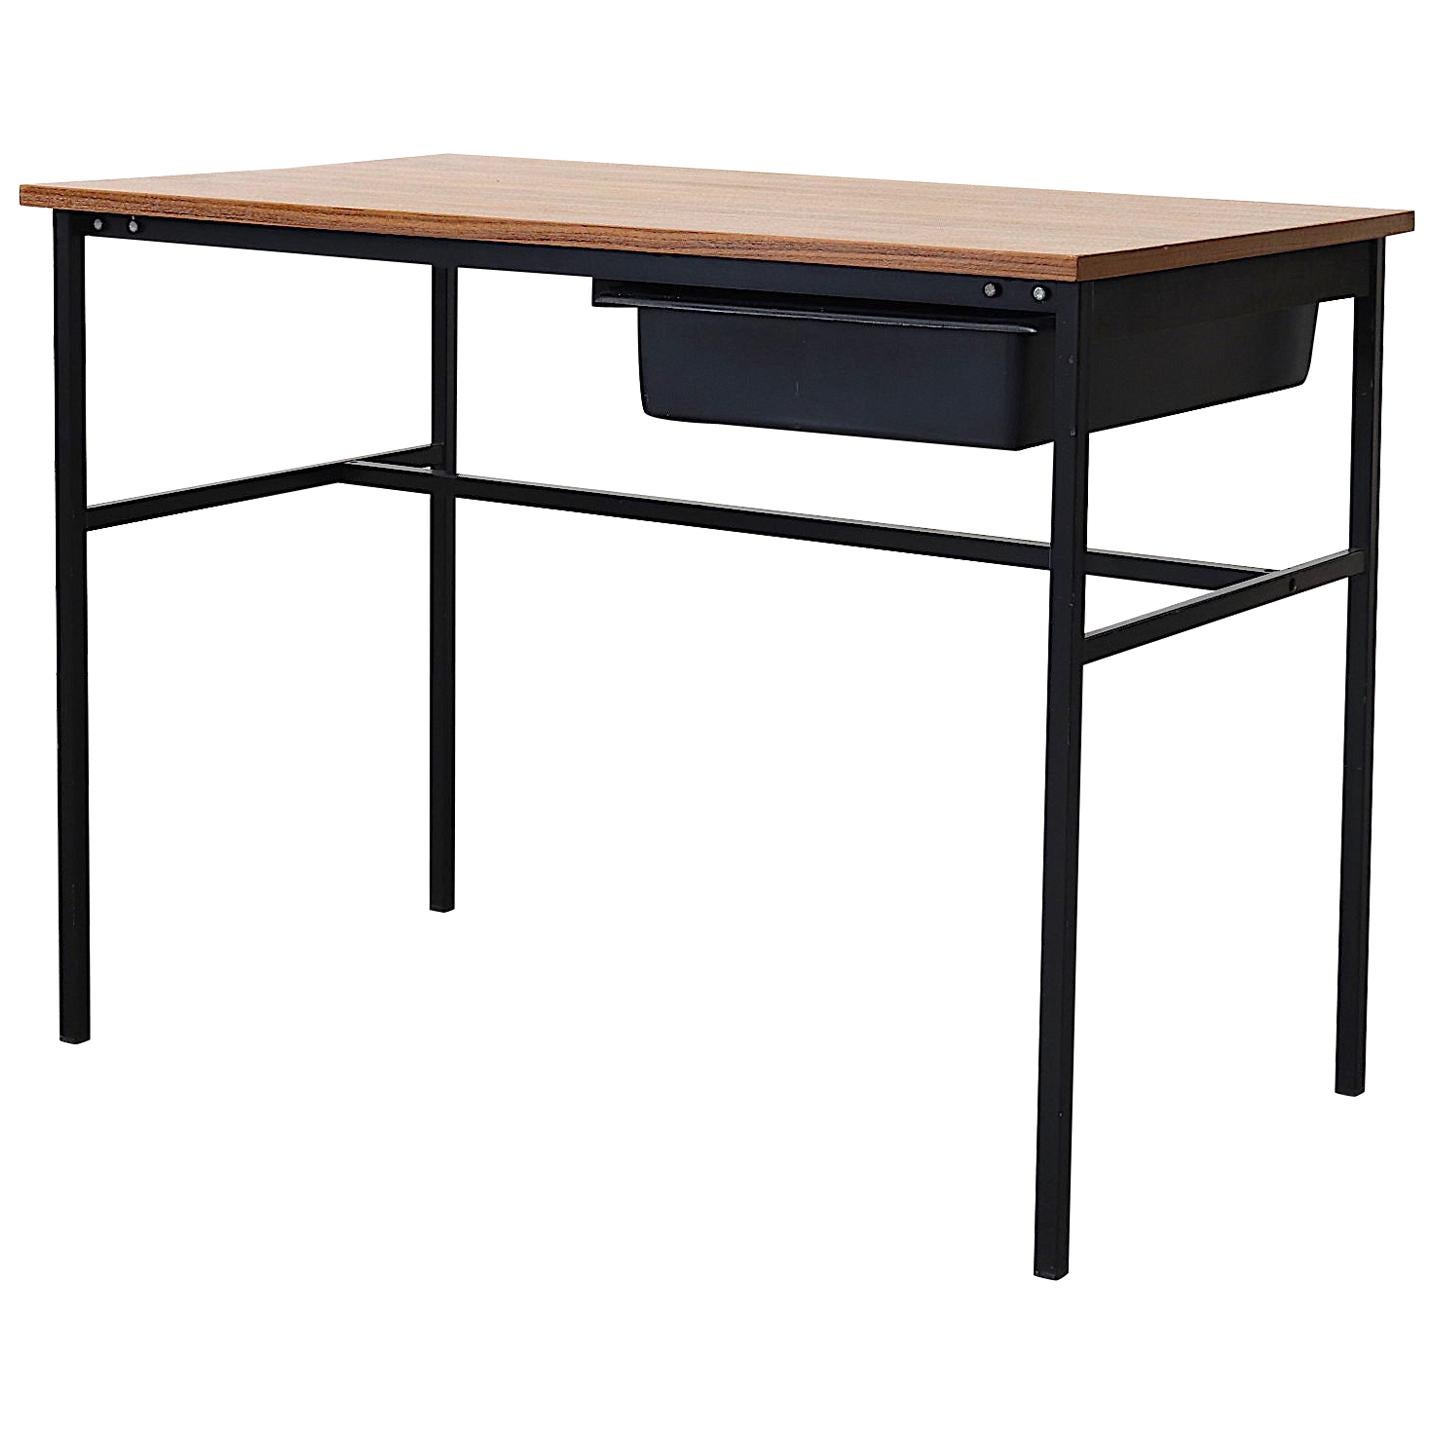 Pierre Guariche Wood Desk Metal Frame with Drawer